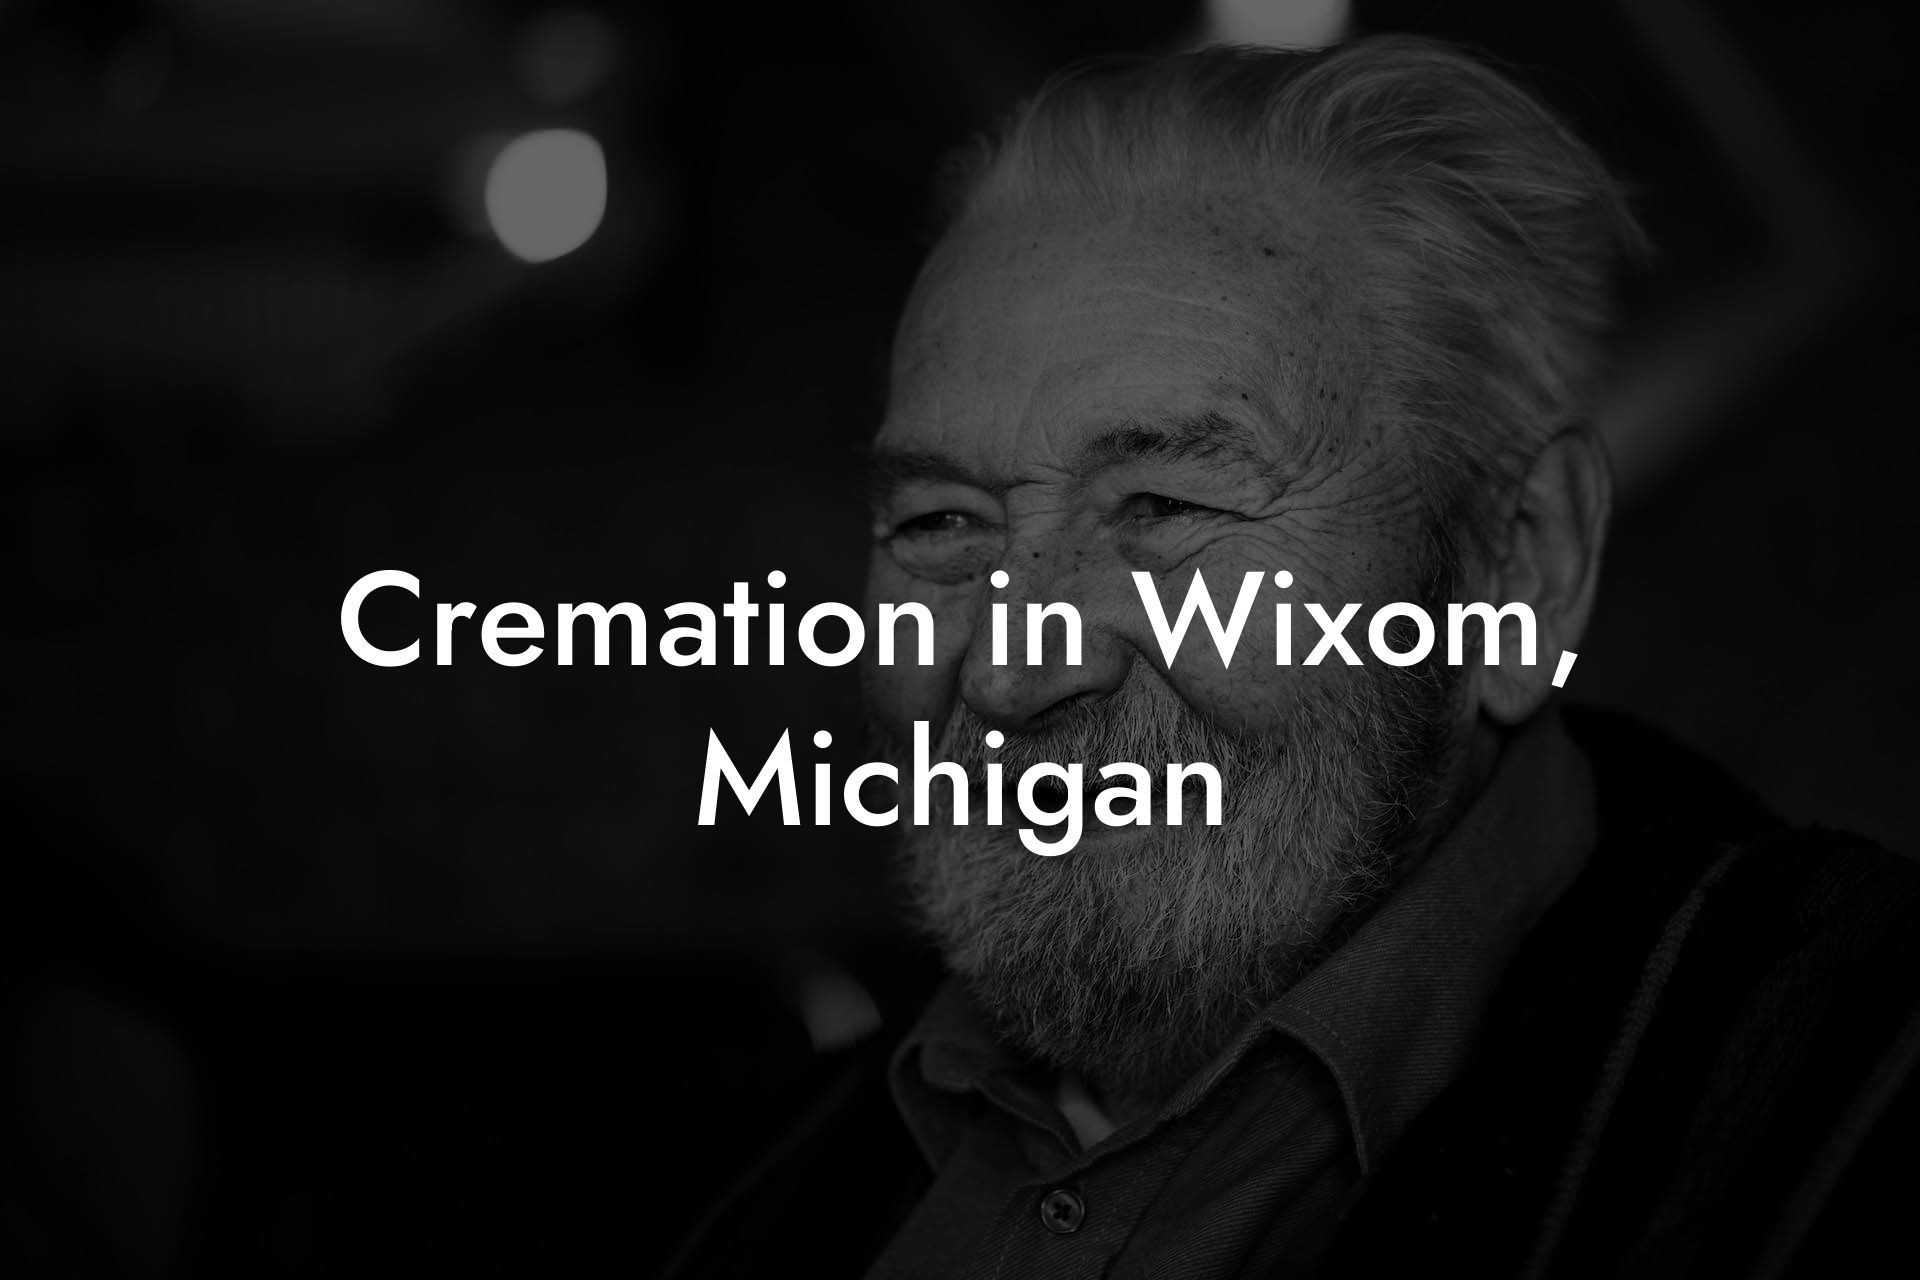 Cremation in Wixom, Michigan